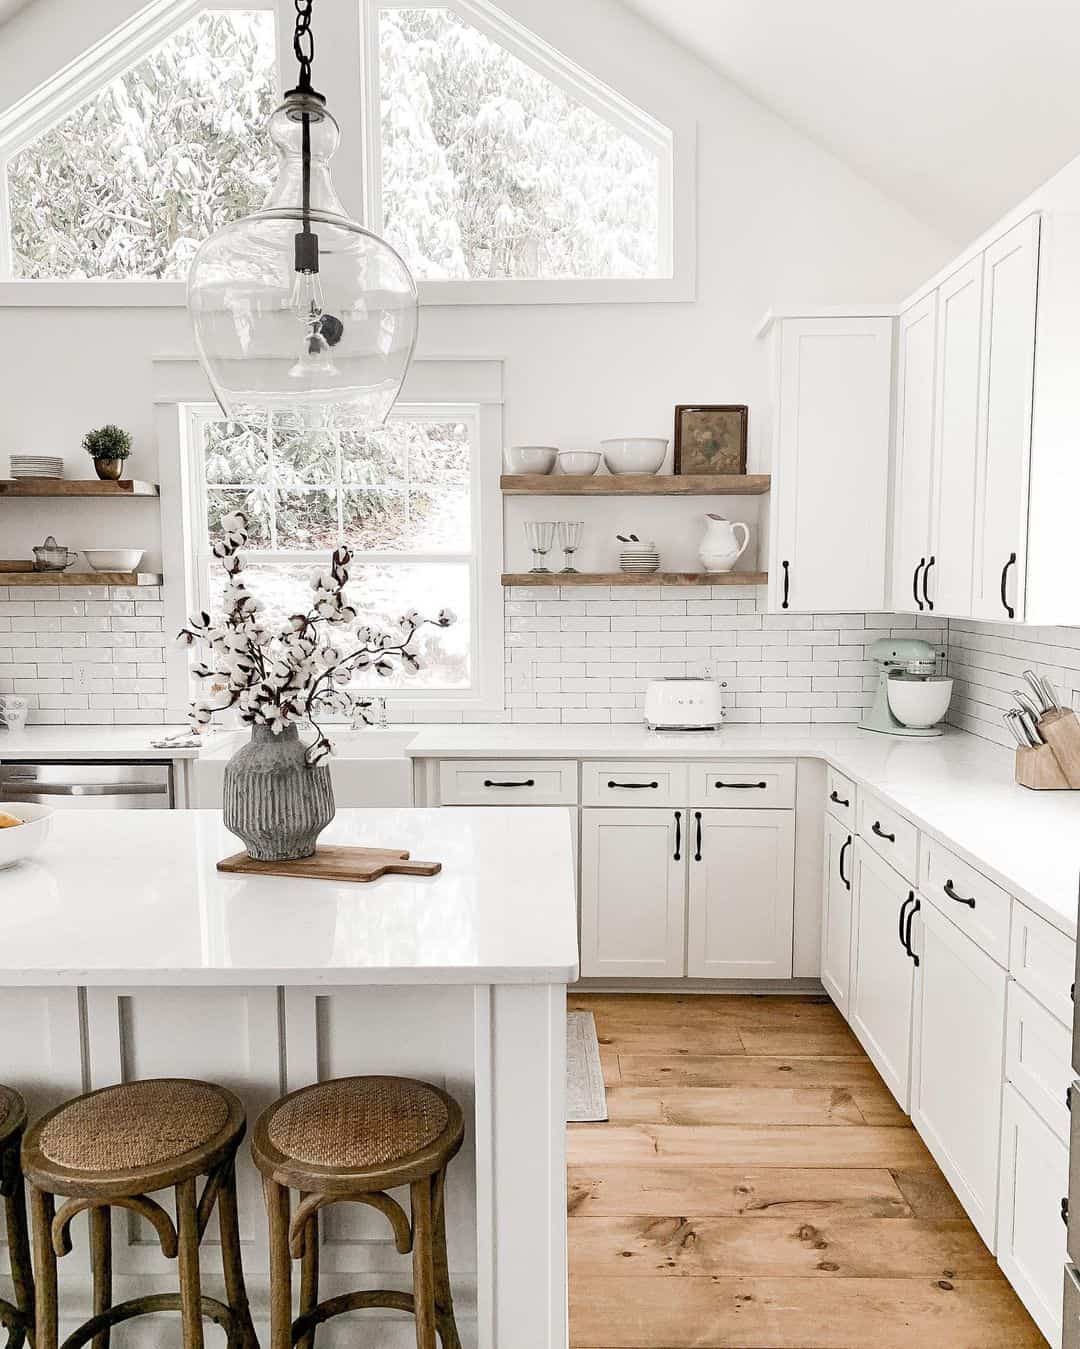 Wood Accents in a White Kitchen - Soul & Lane